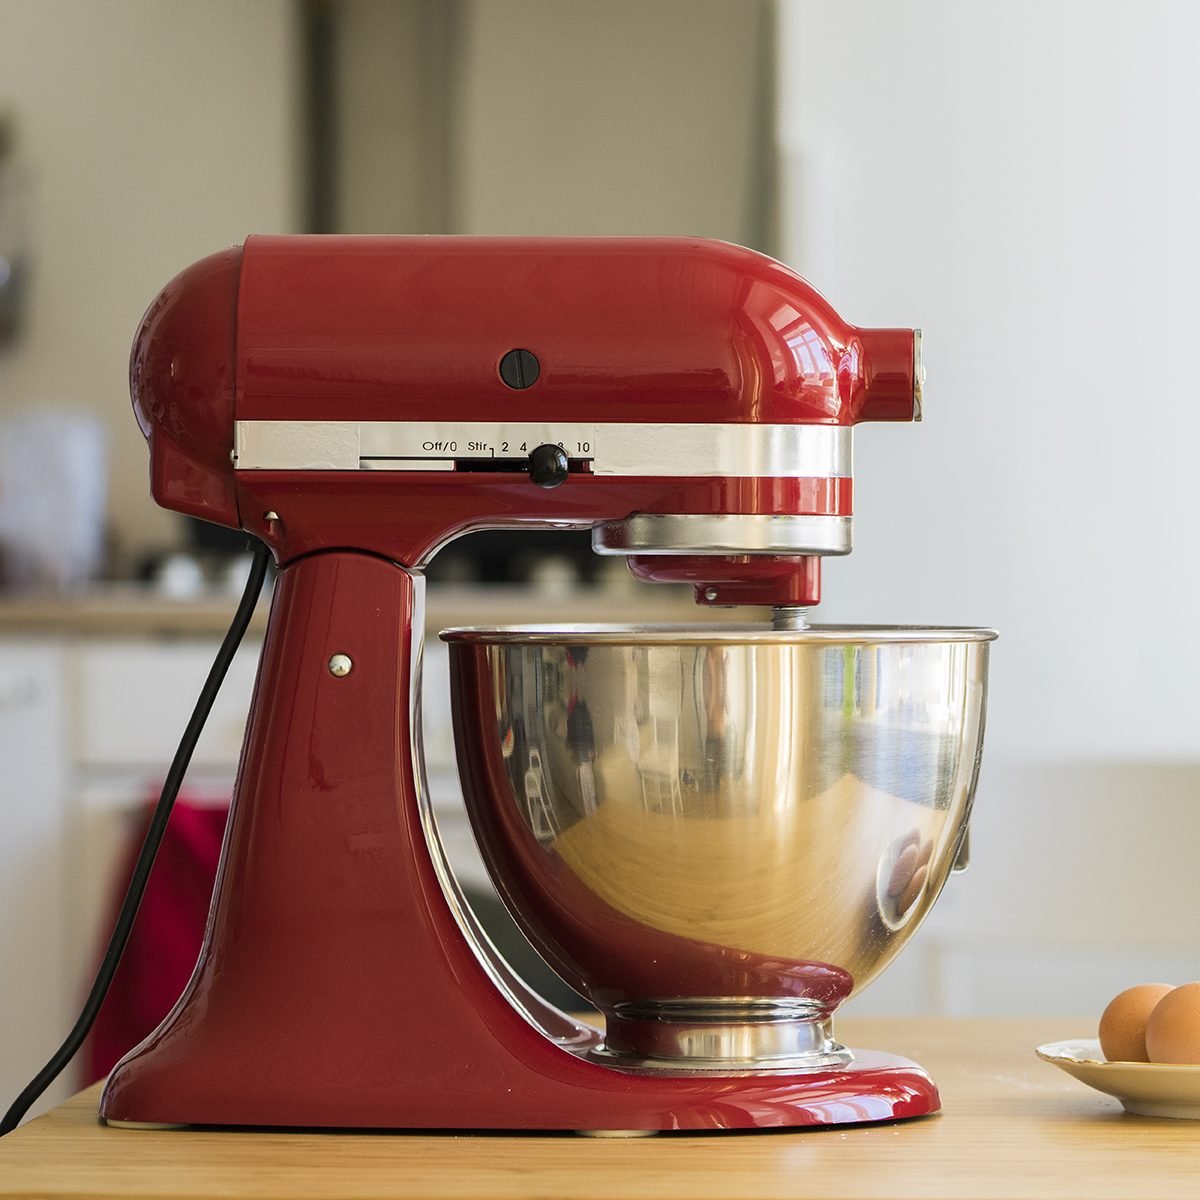 Do you really need a stand mixer? Yes, and here's why